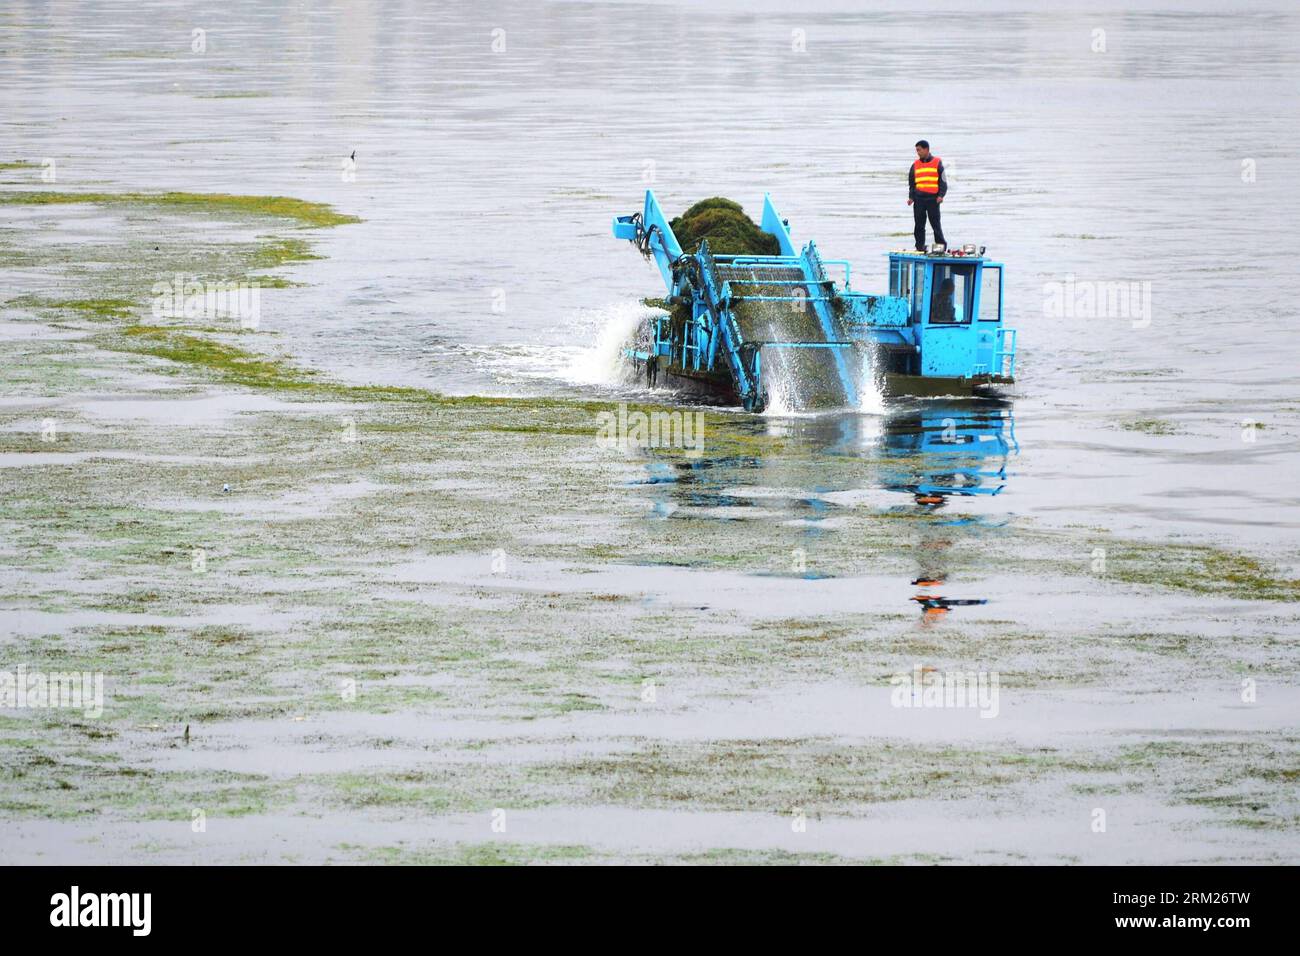 Bildnummer: 59720281  Datum: 28.05.2013  Copyright: imago/Xinhua Members of the local water authority clear overgrown waterweeds with a machine to improve the environment of the Haihe River in Tianjin Municipality, north China, May 28, 2013. (Xinhua/Wang Xiaoming) (wqq) CHINA-TIANJIN-HAIHE RIVER-WATERWEEDS (CN) PUBLICATIONxNOTxINxCHN Gesellschaft x2x xkg 2013 quer o0 Ökologie Wasser, Algen Algenpest     59720281 Date 28 05 2013 Copyright Imago XINHUA Members of The Local Water Authority Clear overgrown Waterweeds With a Machine to Improve The Environment of The Haihe River in Tianjin Municipal Stock Photo